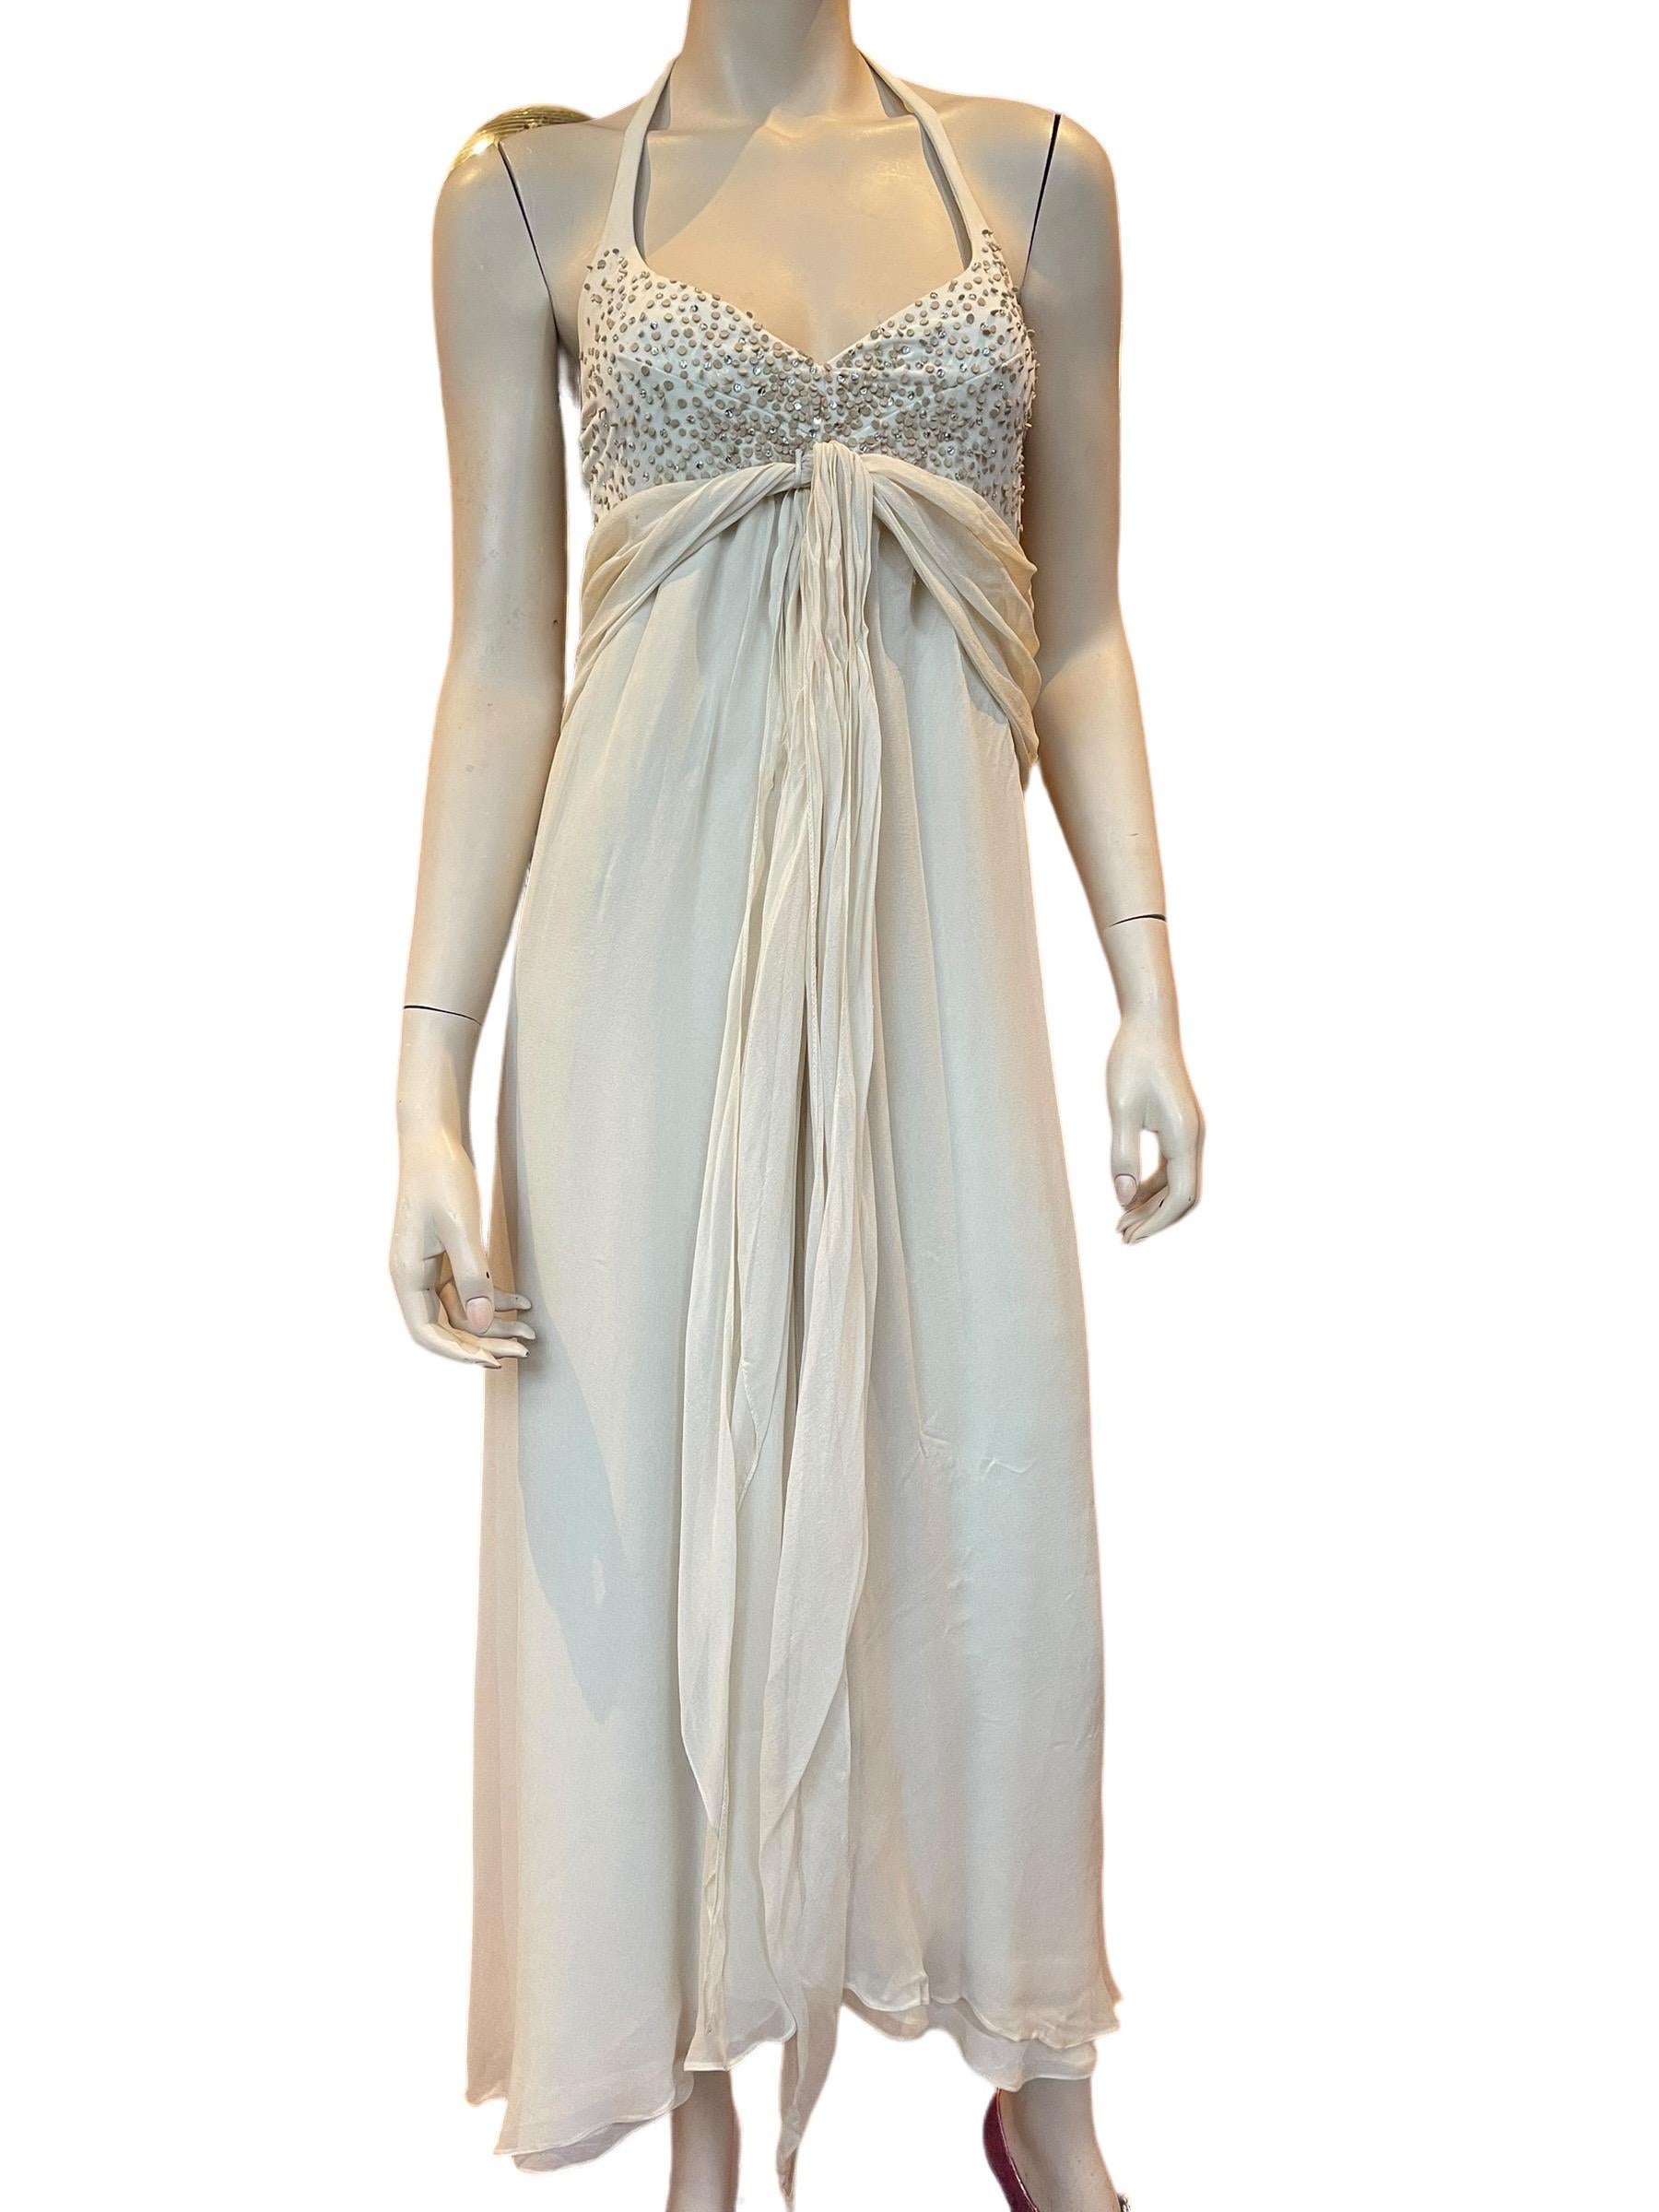 Y2K Stephen Burrows Cream Chiffon Halter Dress with Rhinestone Detailing  In Good Condition For Sale In Greenport, NY